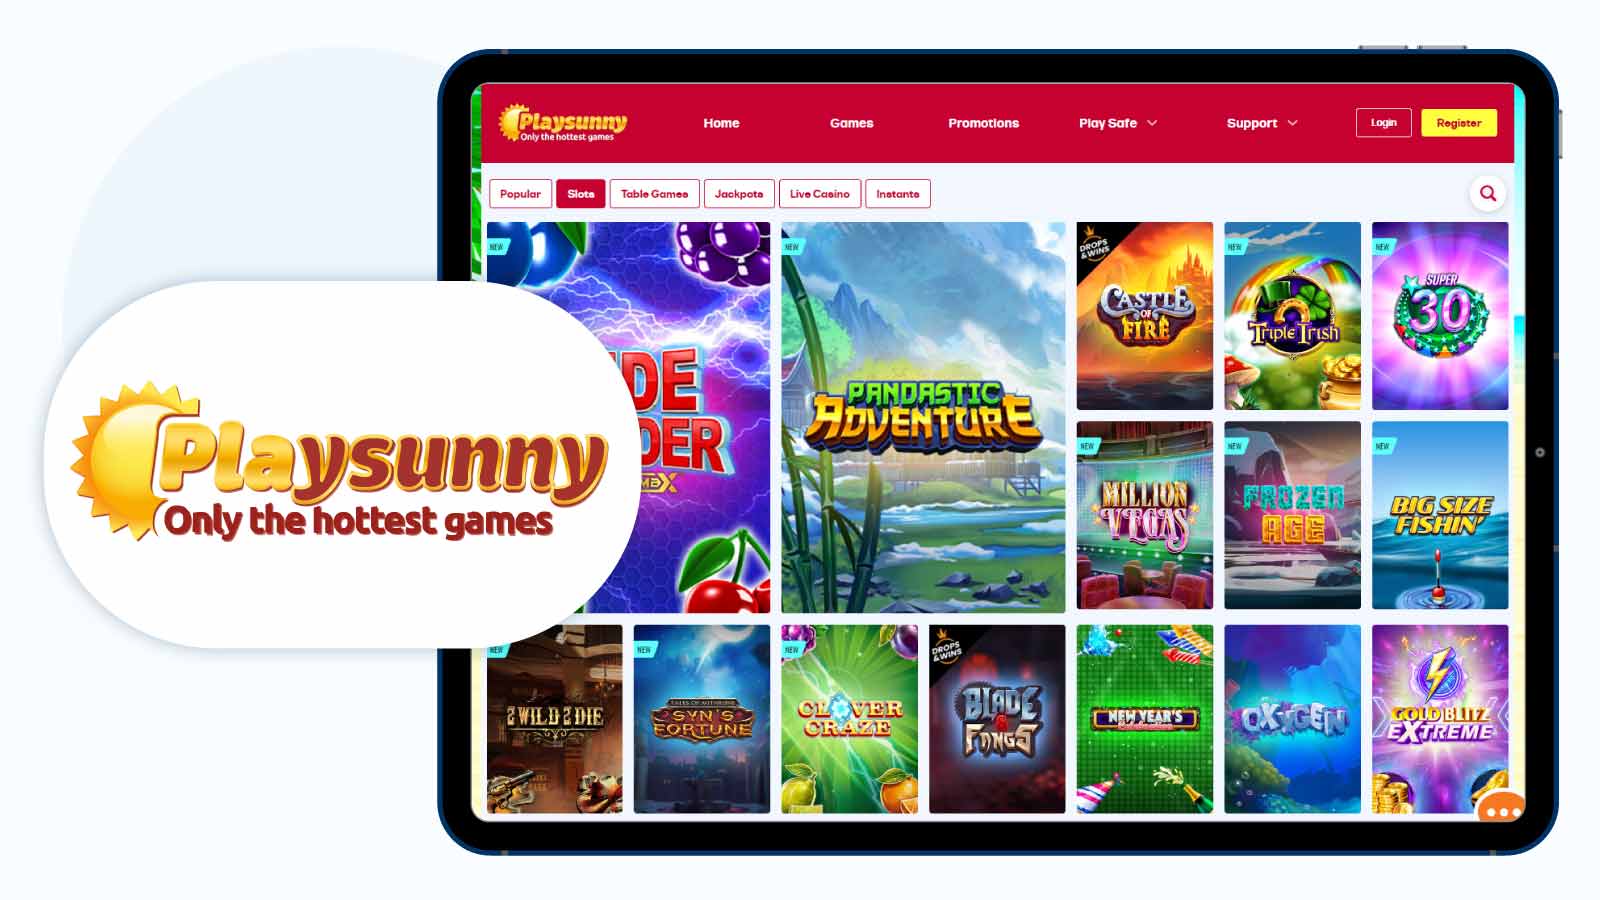 Playsunny Casino – Eyecon Casino with The Top Slots Catalog in the UK